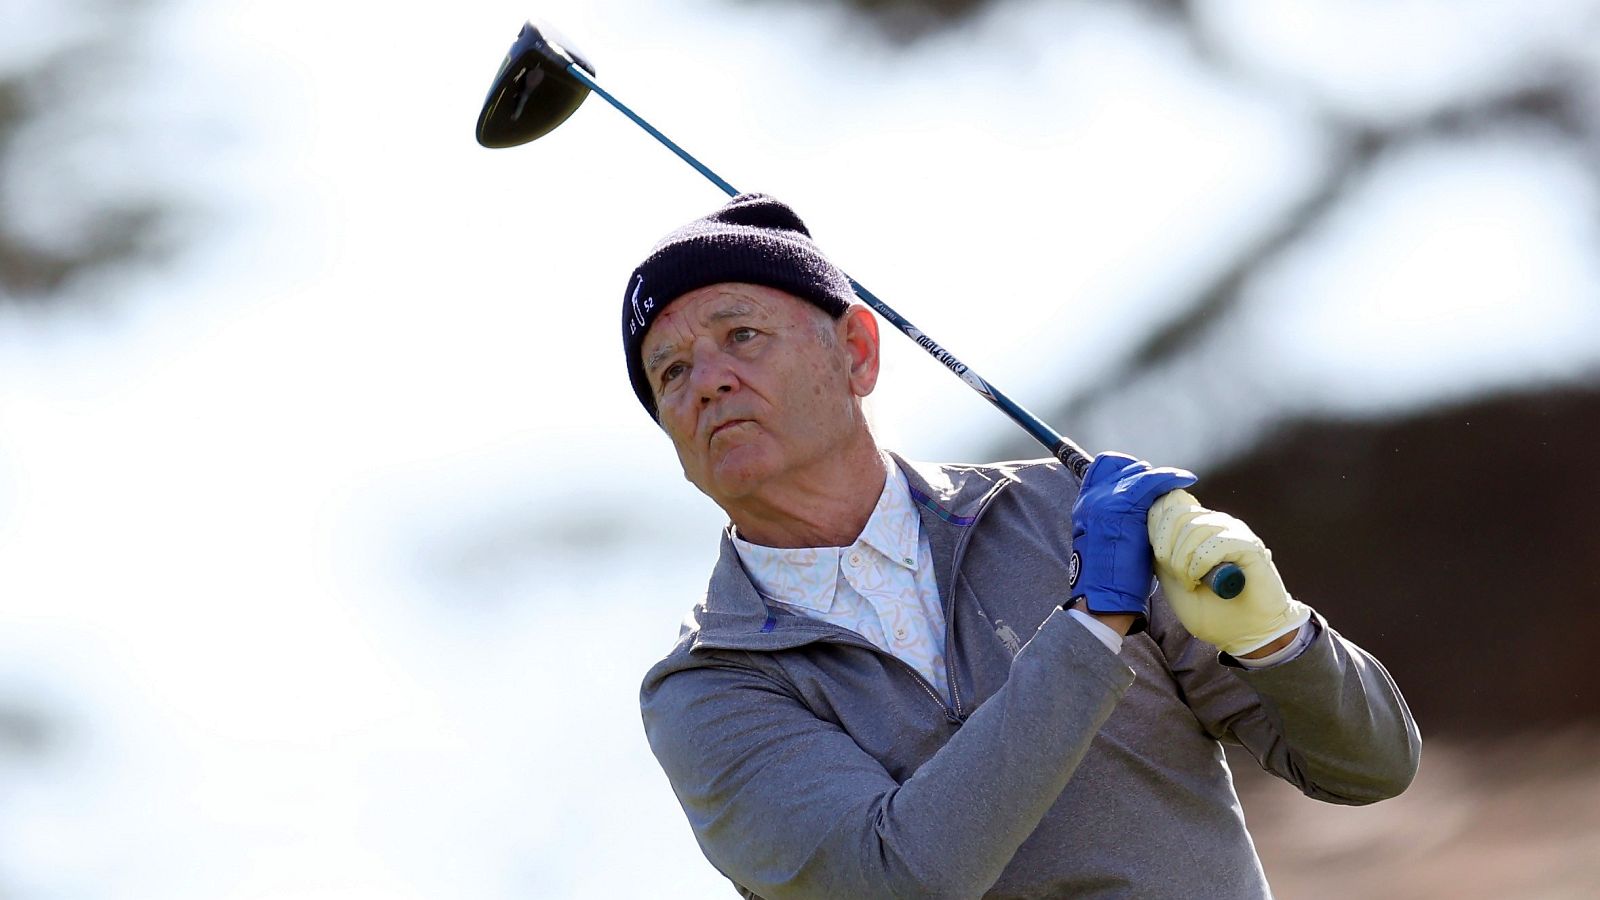 Bill Murray (Caddyshack, Ghostbusters etc.) © Jed Jacobsohn/Getty Images